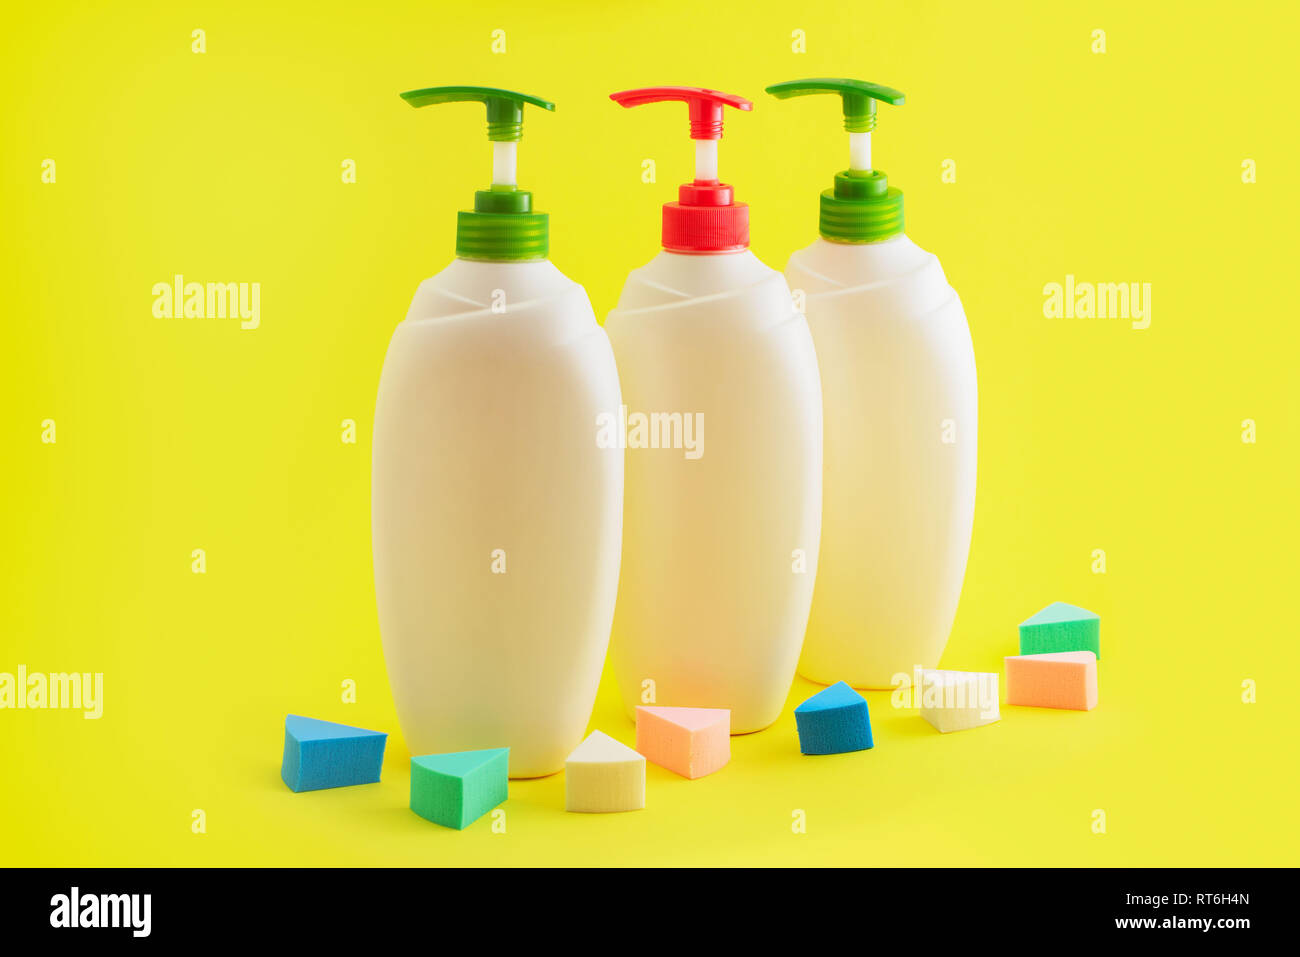 Download Three Plastic Bottles With Dispenser On Yellow Background Cosmetics For Body And Hair Stock Photo Alamy Yellowimages Mockups